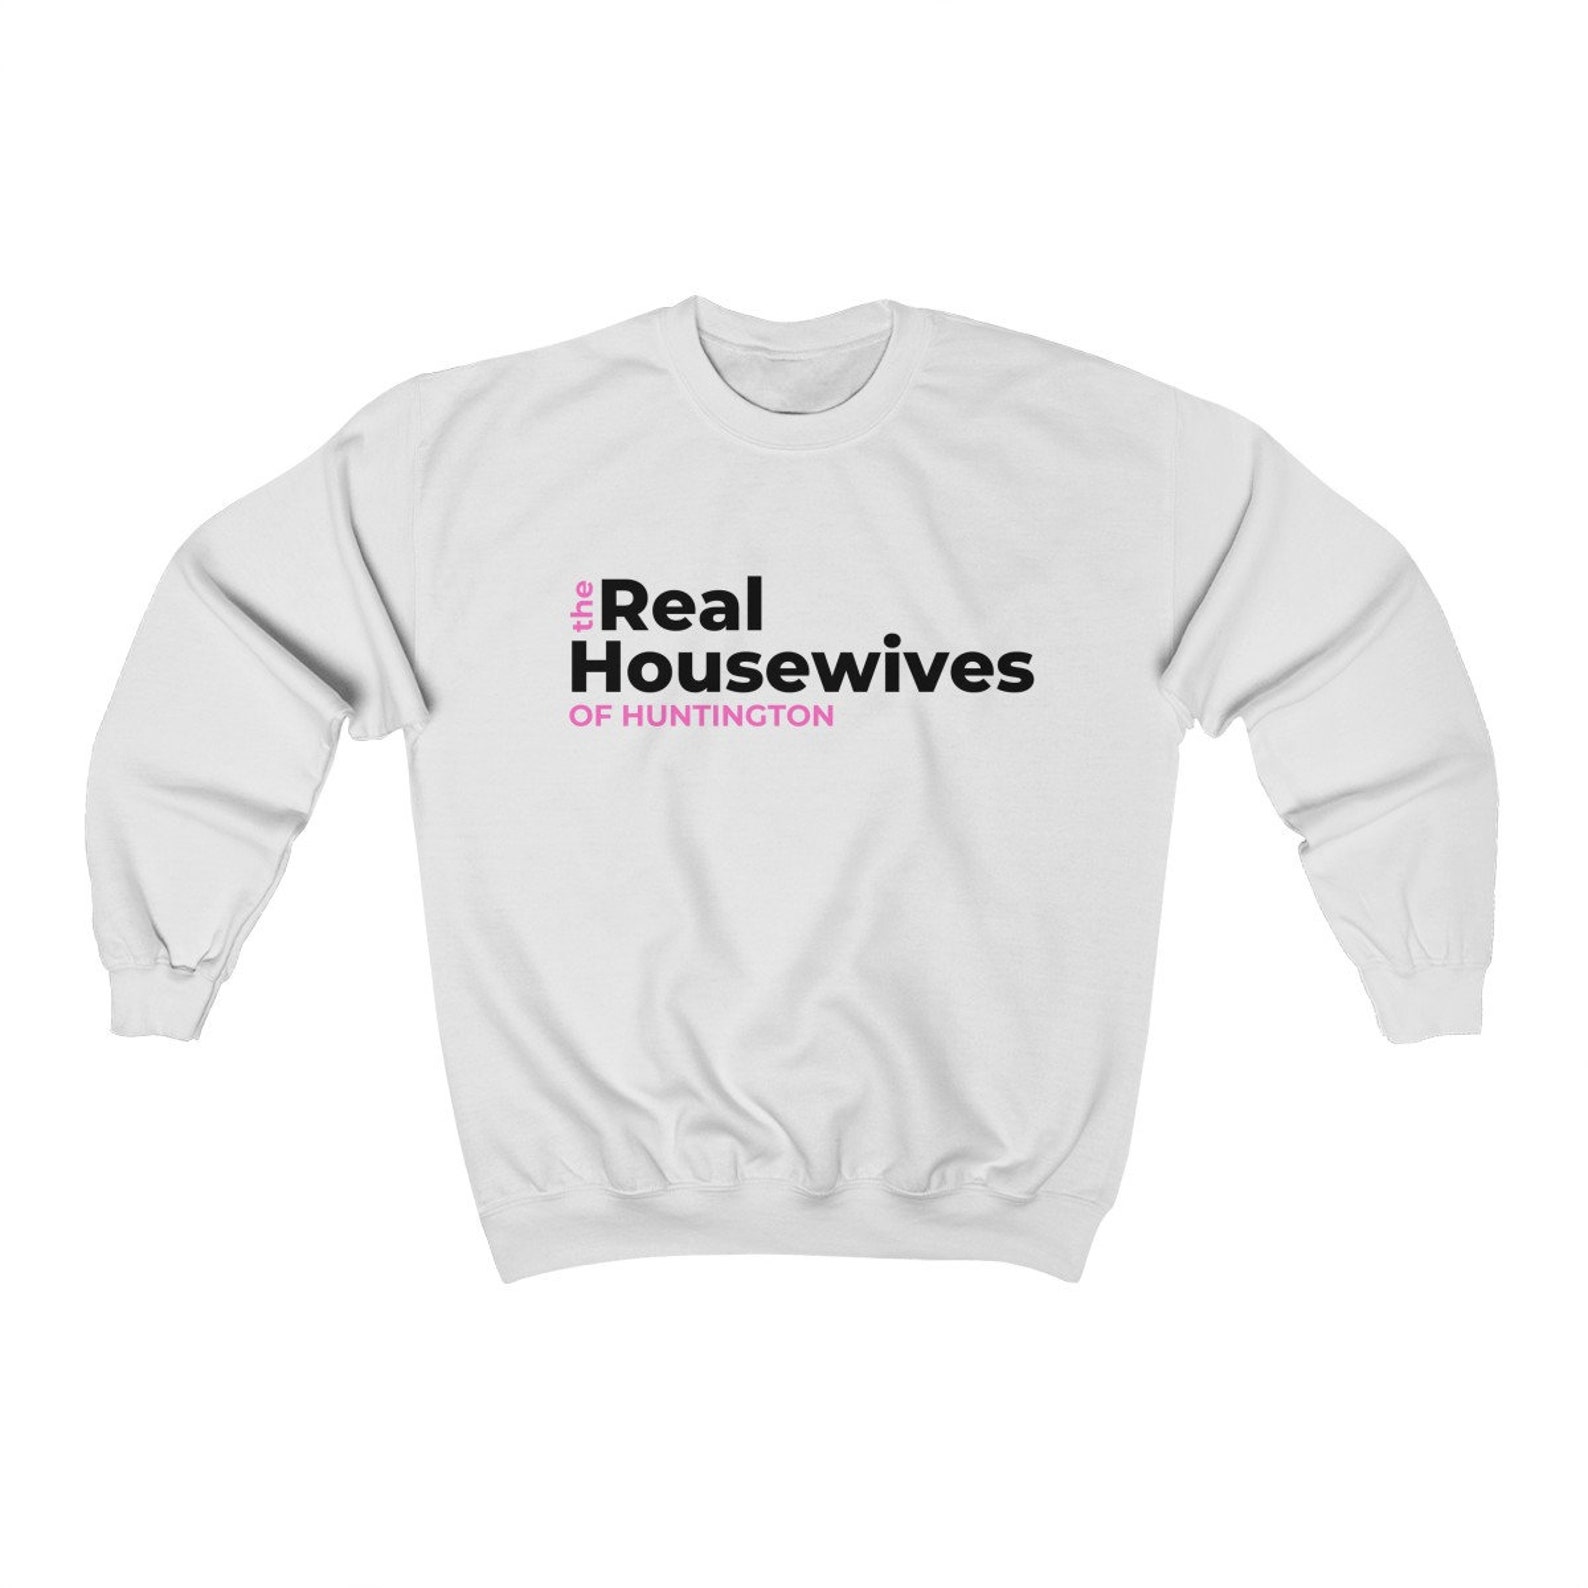 Real Housewives Svg of YOUR TOWN the Real Housewives Svg - Etsy